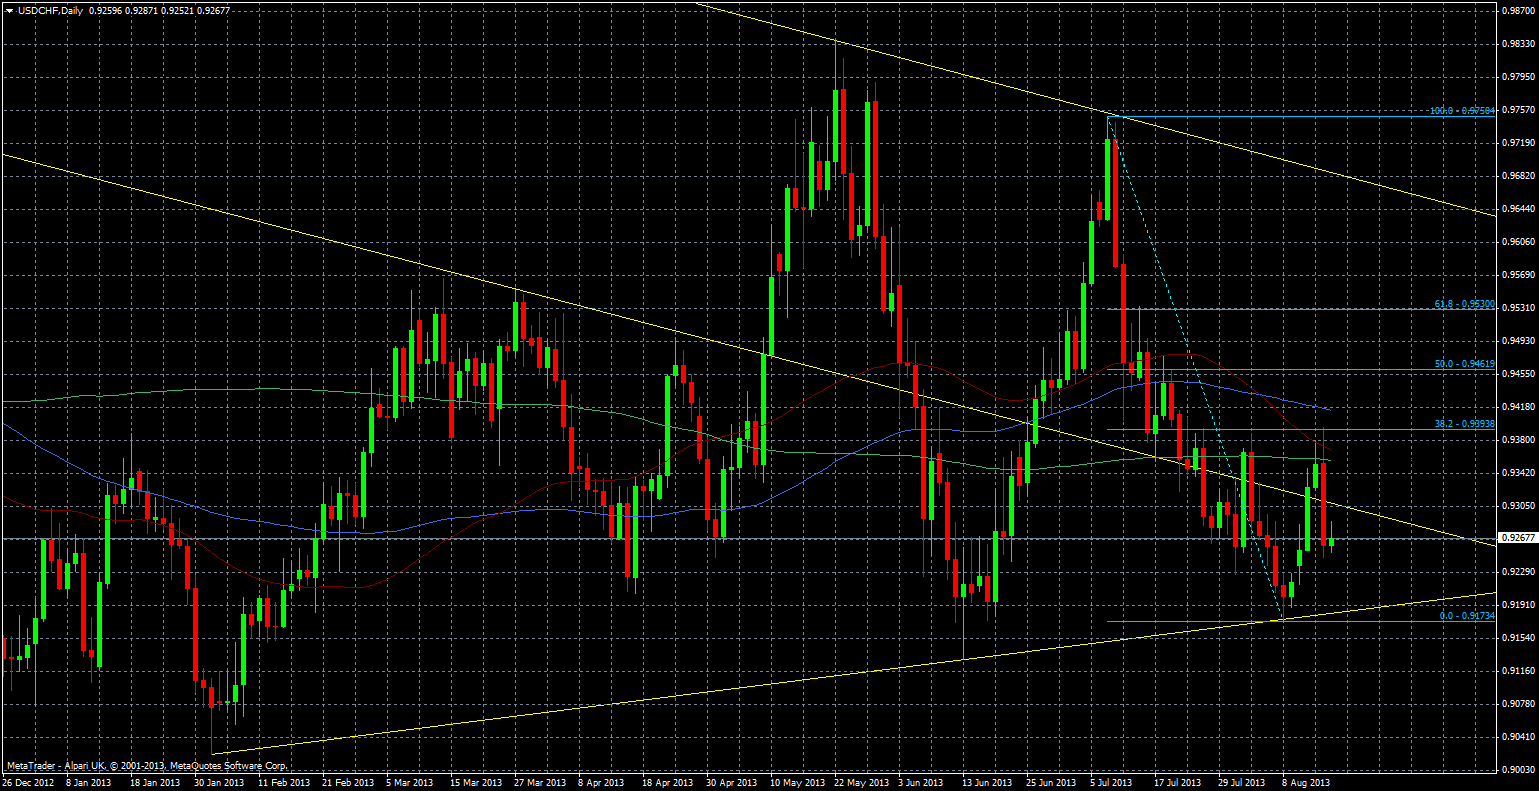 USD/CHF Daily technical analysis chart 16 August 2013